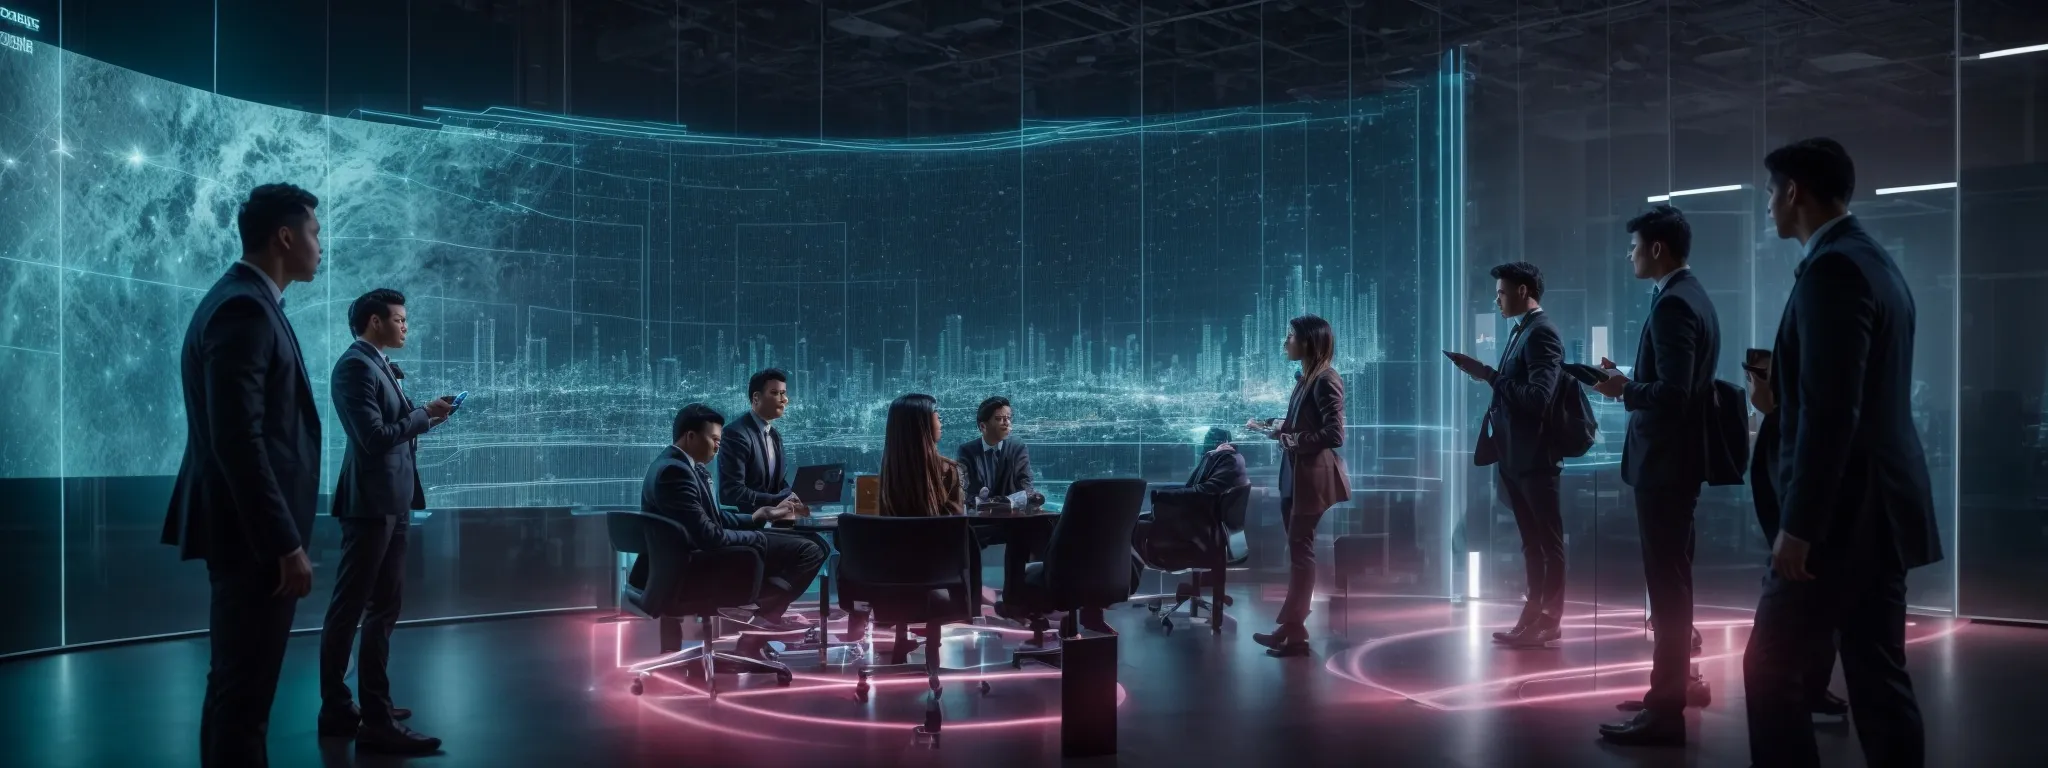 a team of professionals gather around a holographic display showing rising analytics and seo trends.